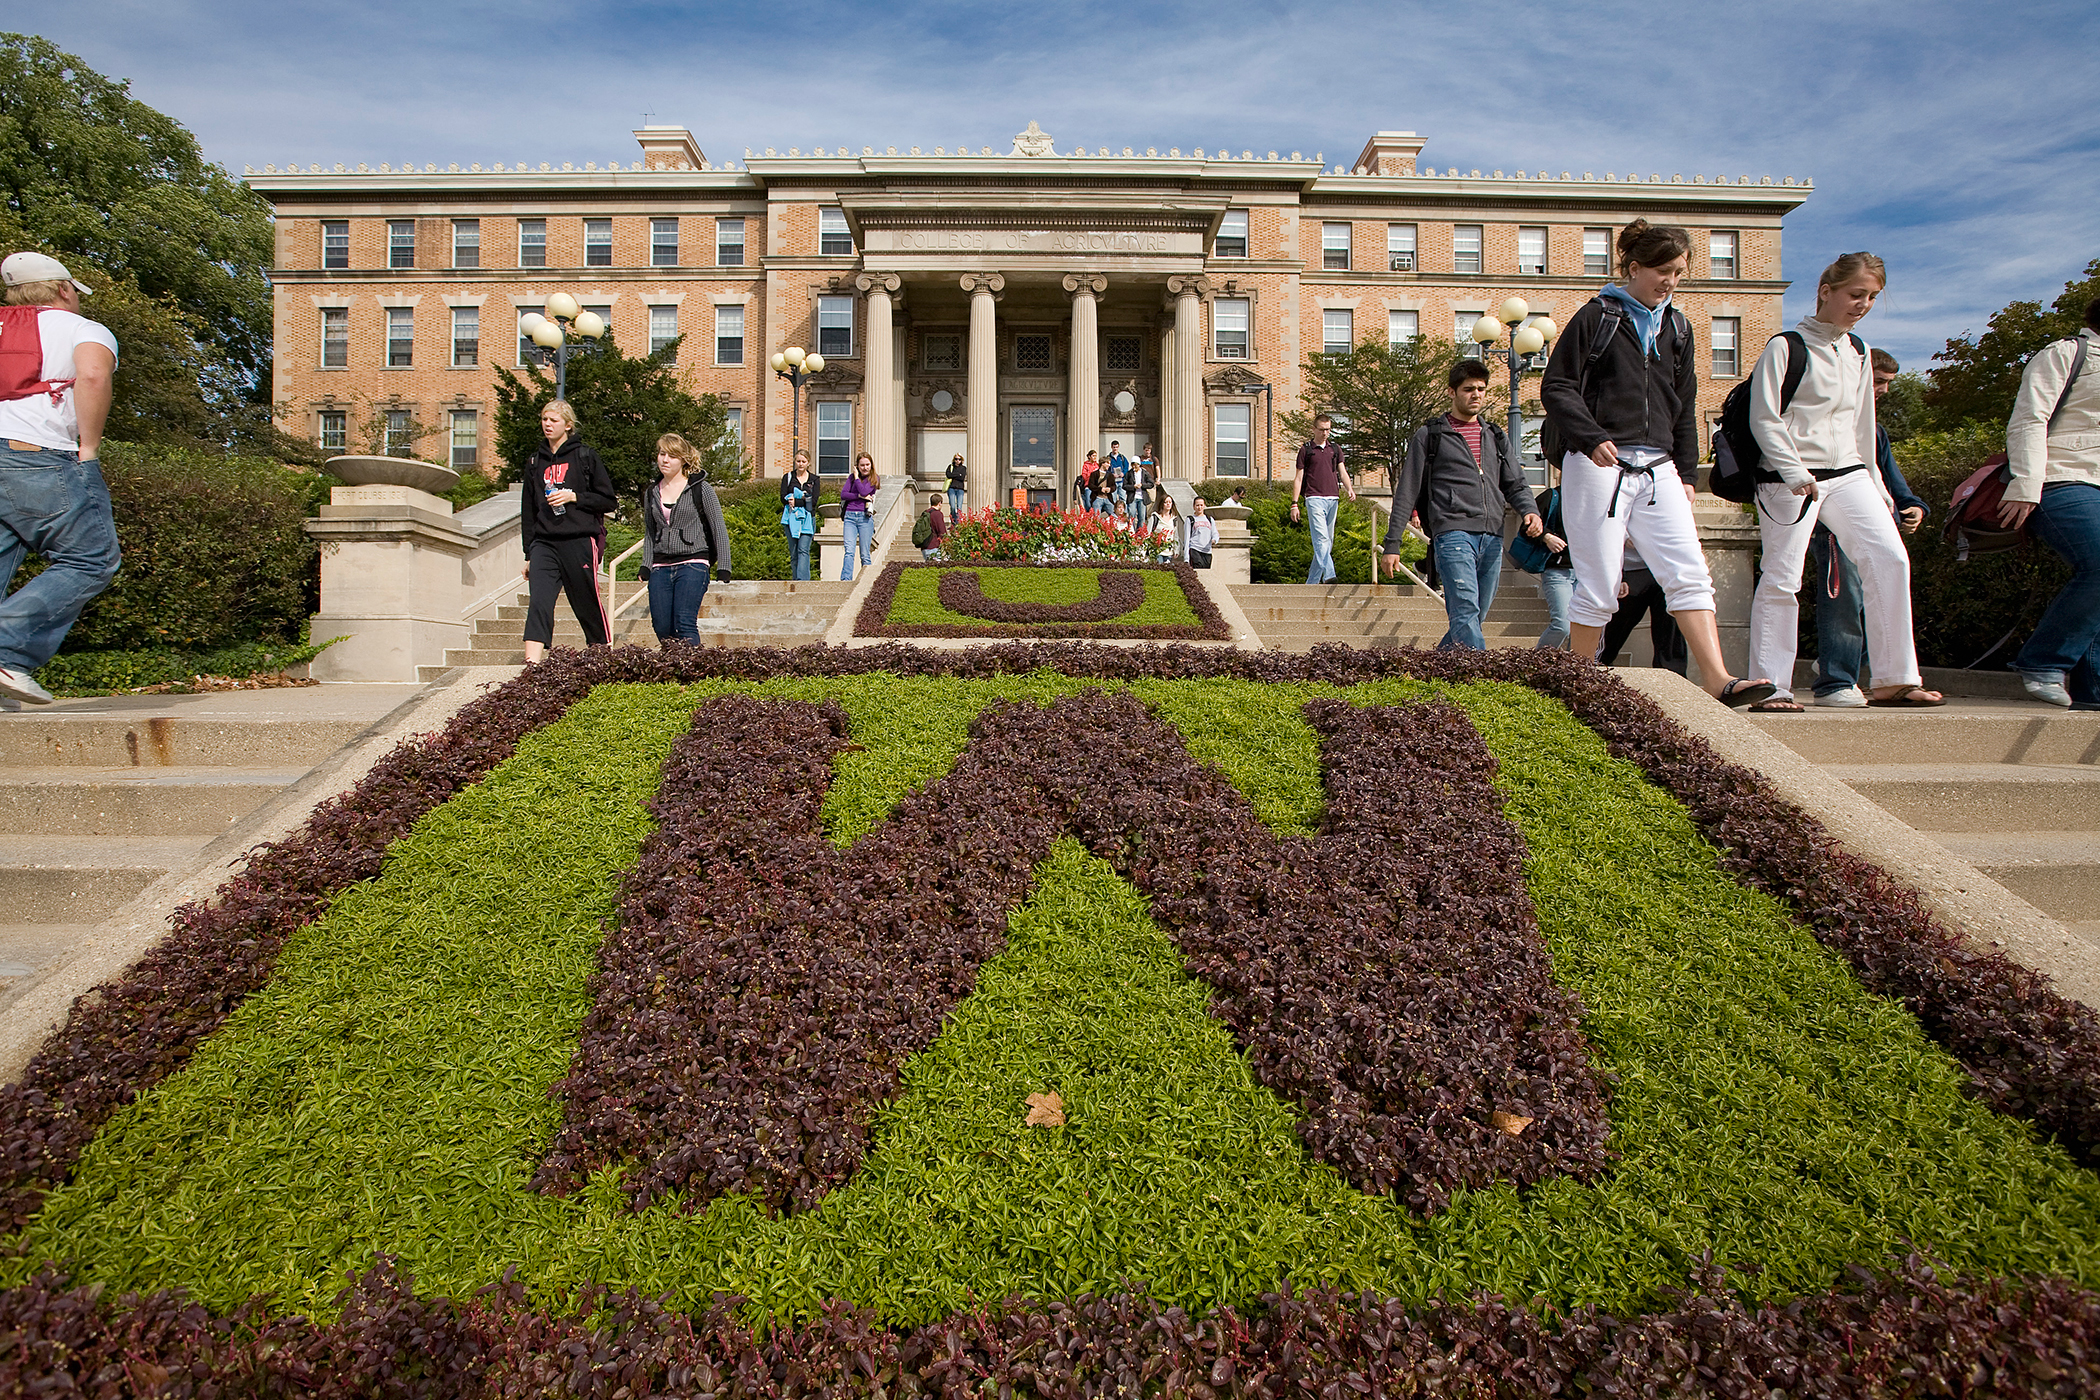 Students make their way between classes on the steps of Agricultural Hall at the University of Wisconsin-Madsion on October 17, 2007.